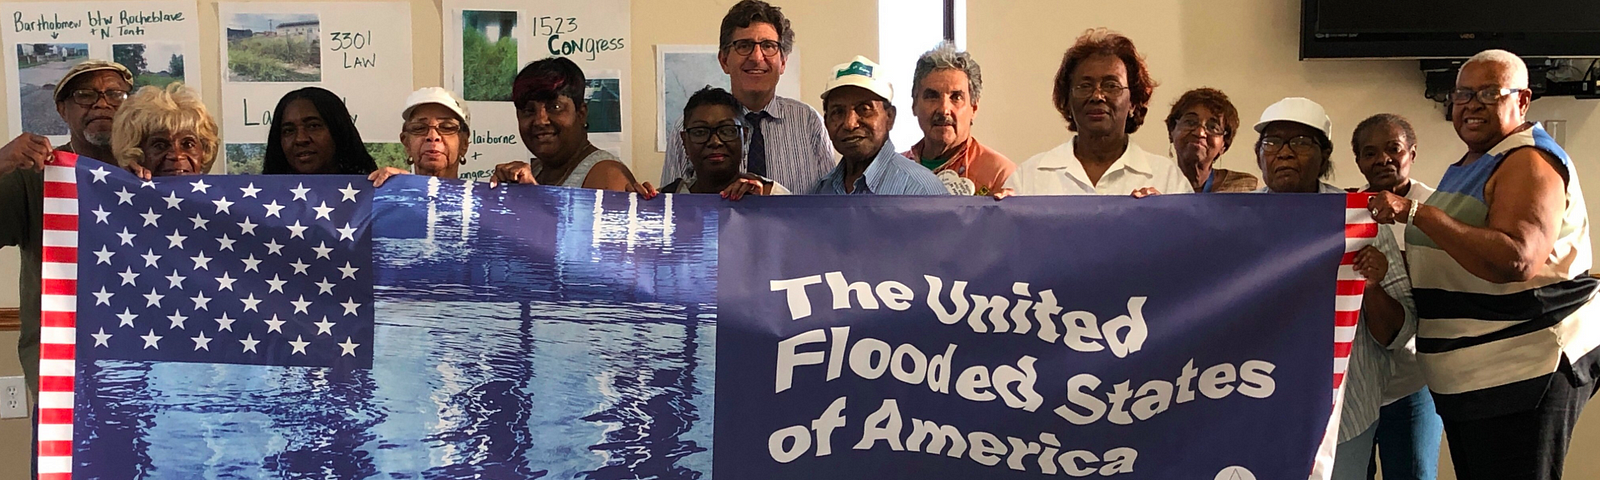 For members The United Flooded States of America, chronic flooding is a political issue, not just a climate issue.